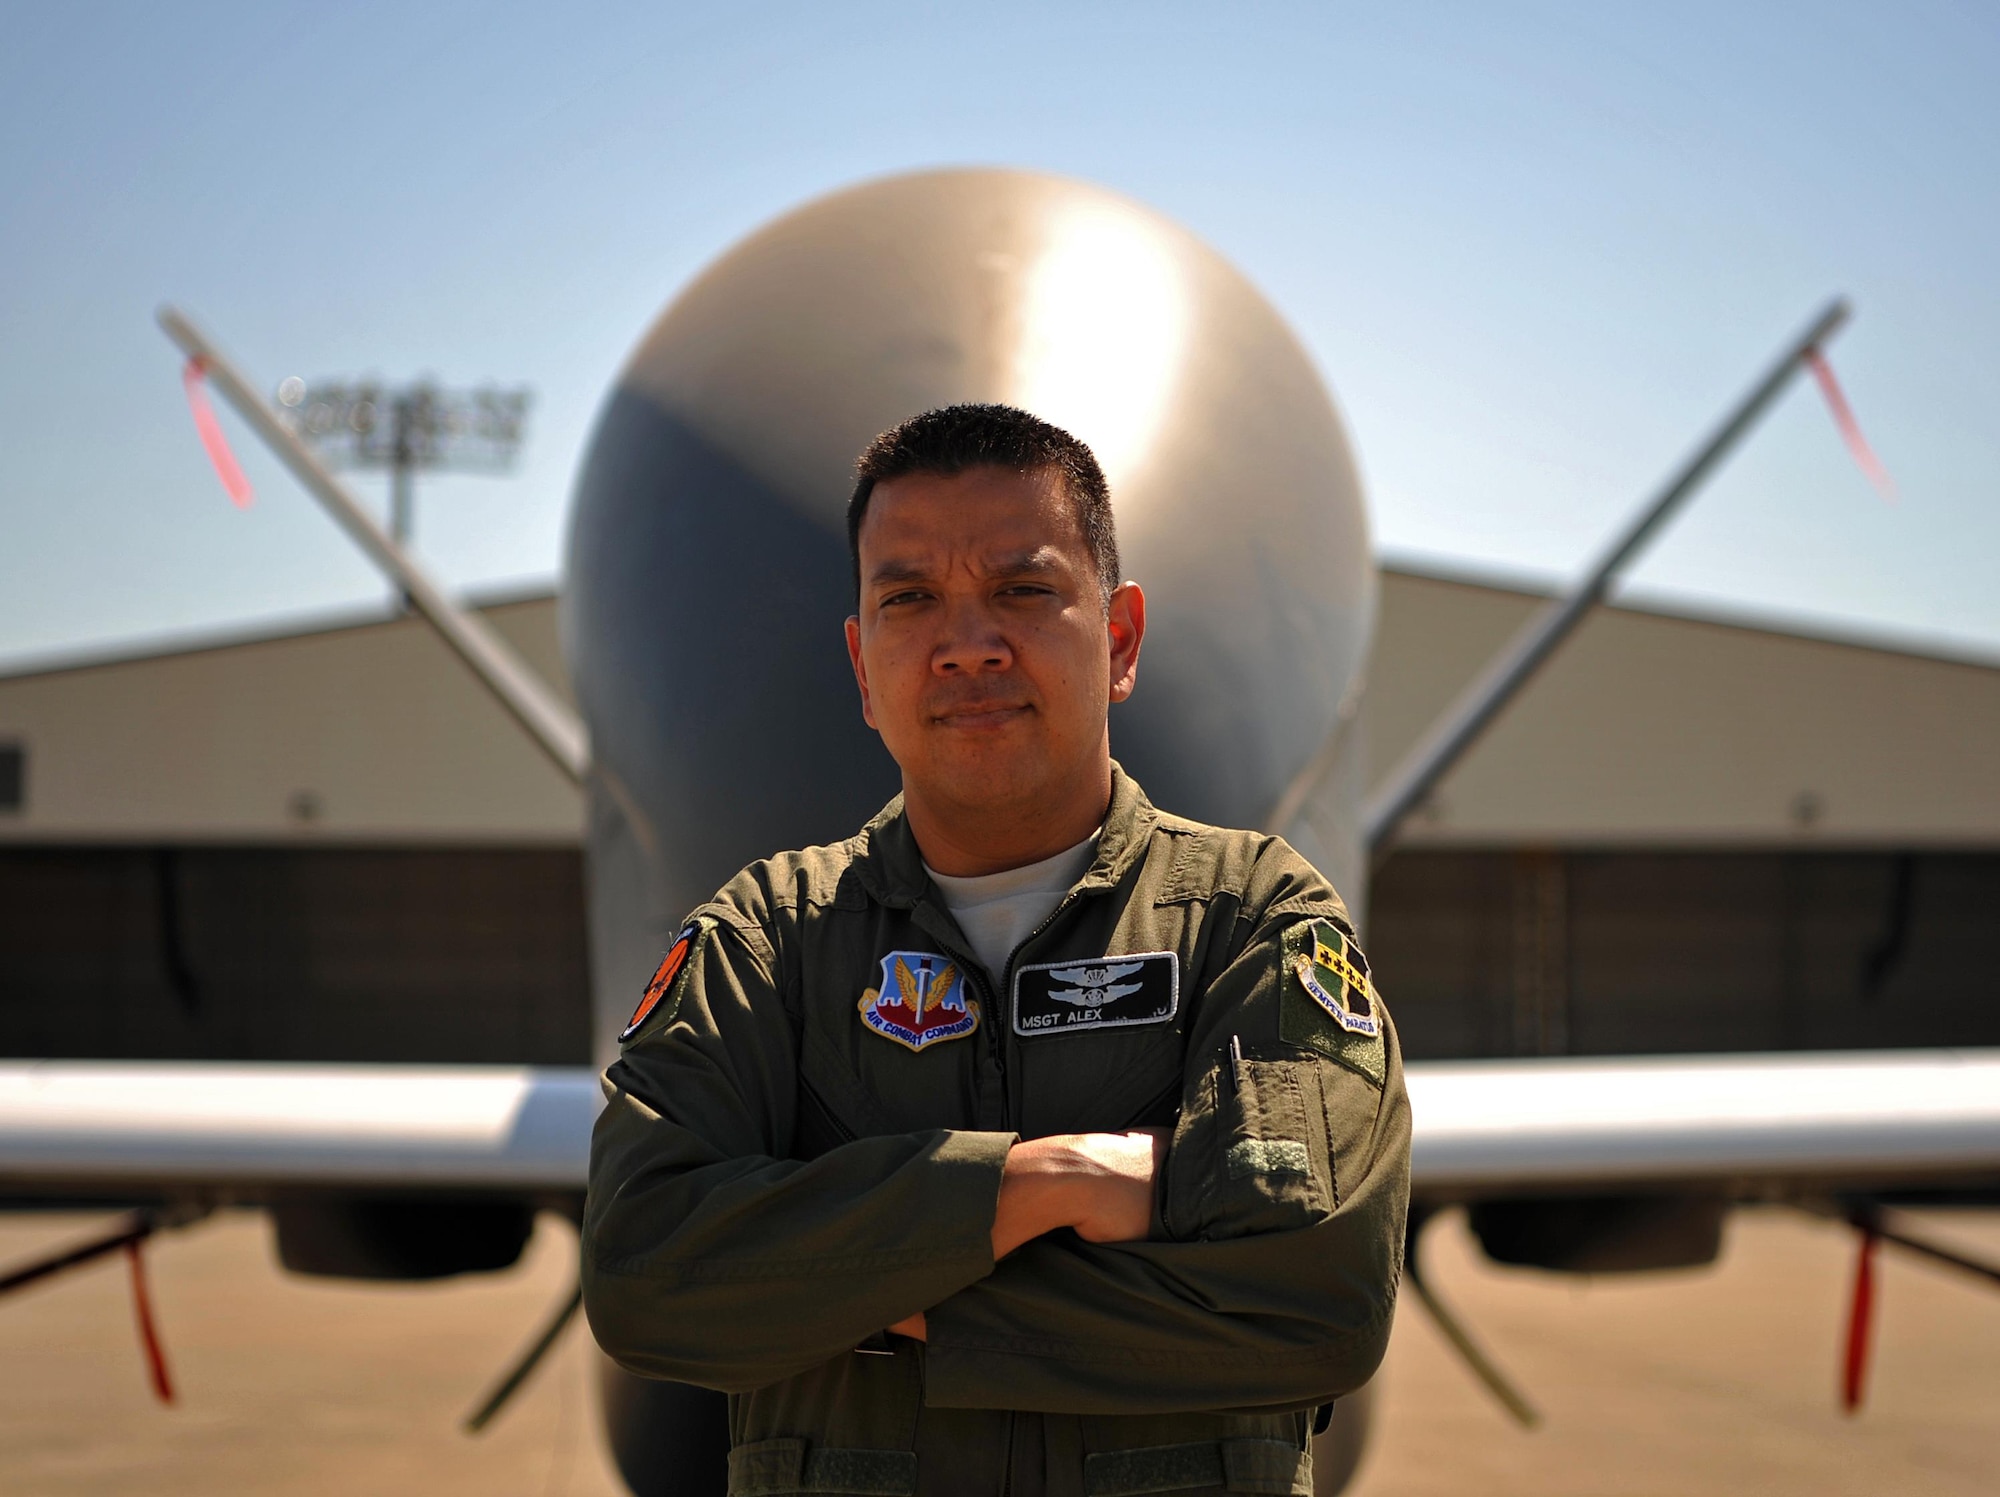 Master Sgt. Alex, 12th Reconnaissance Squadron student pilot, poses for a photo in front of a RQ-4 Global Hawk June 21, 2017 at Beale Air Force Base, California. Alex was previously a sensor operator on the RQ-4 who was stationed at Beale before going through all of the training to become a remotely piloted aircraft pilot. He has returned to Beale to finish his training to become an enlisted pilot and fly the RQ-4. (U.S. Air Force photo/Airman 1st Class Tristan D. Viglianco)